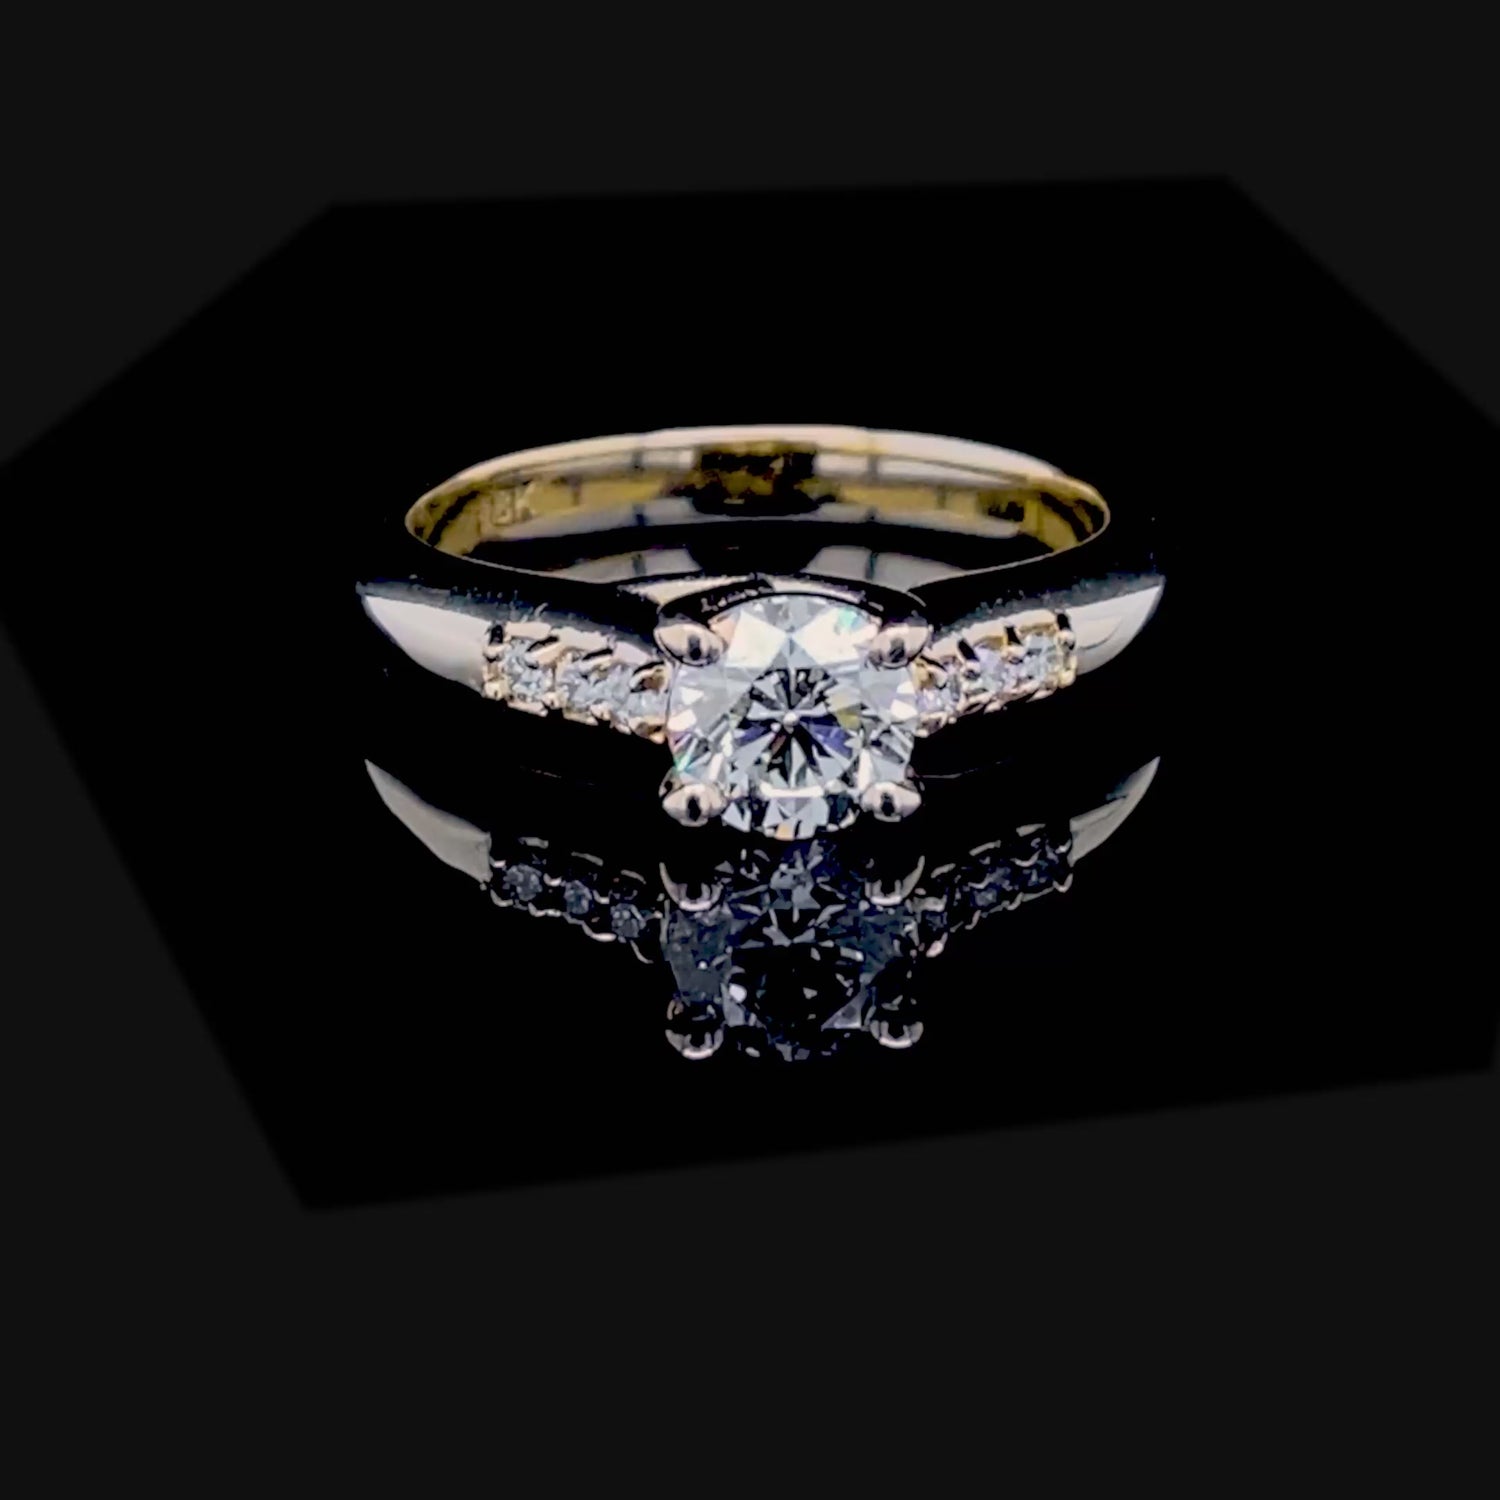 Certified 0.90CT Round Cut Diamond Engagement Ring in 18KT Yellow Gold